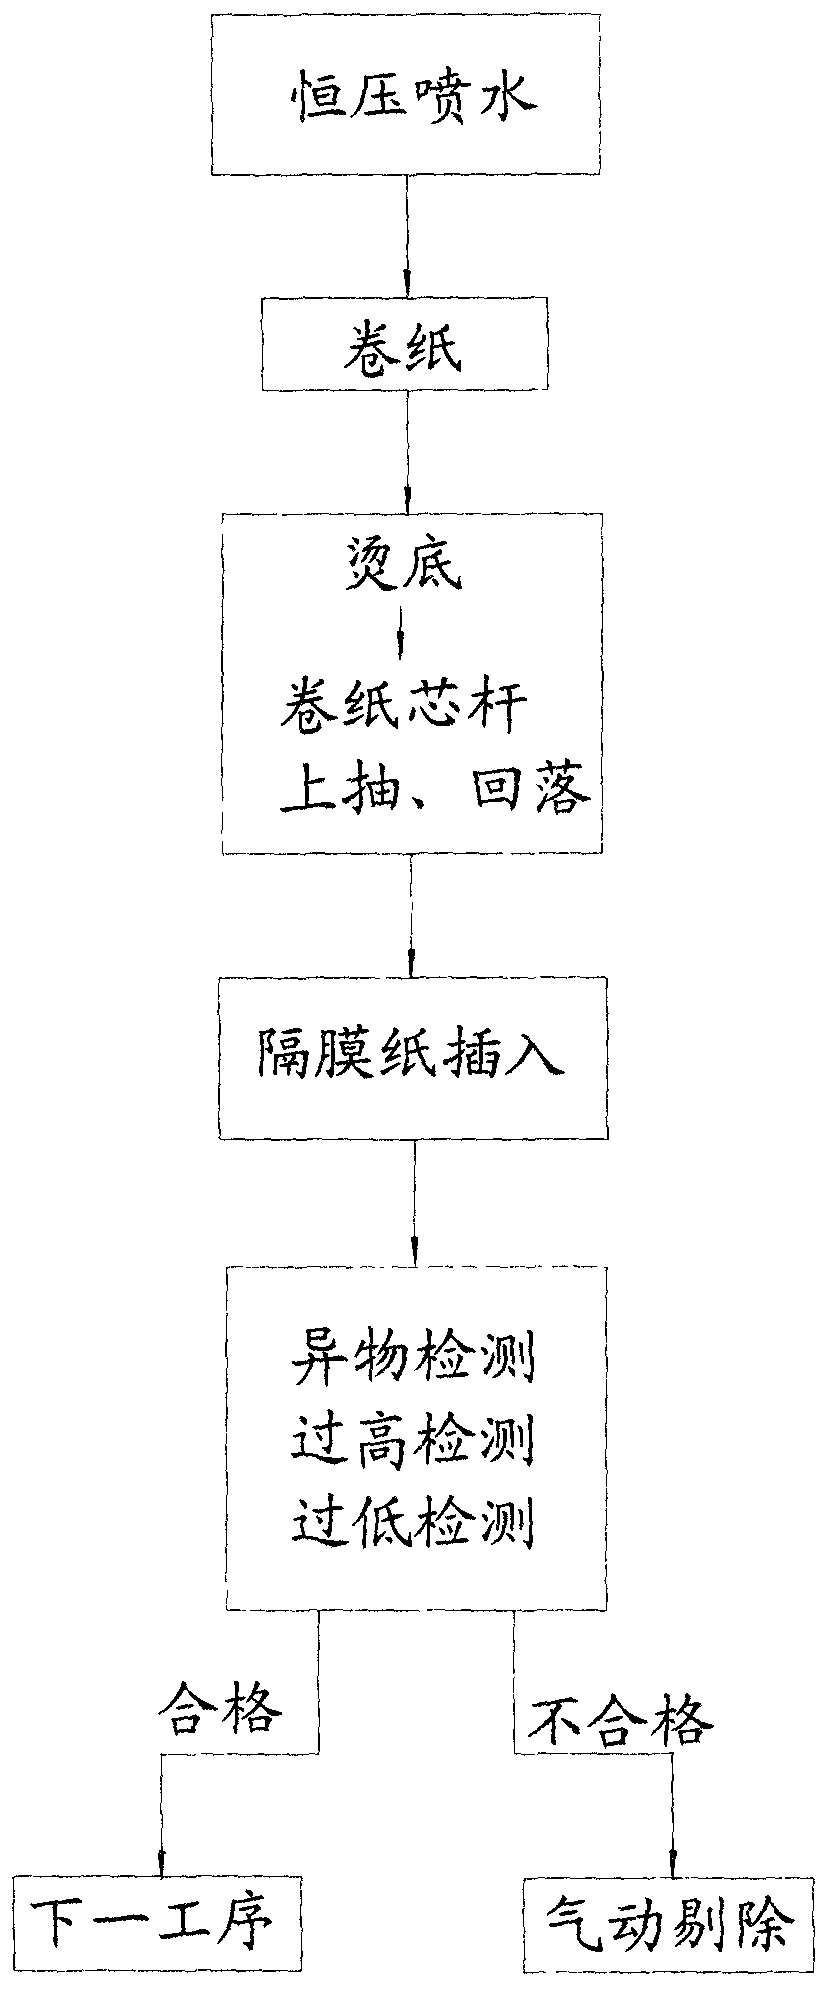 Diaphragm paper processing method for manufacturing dry battery